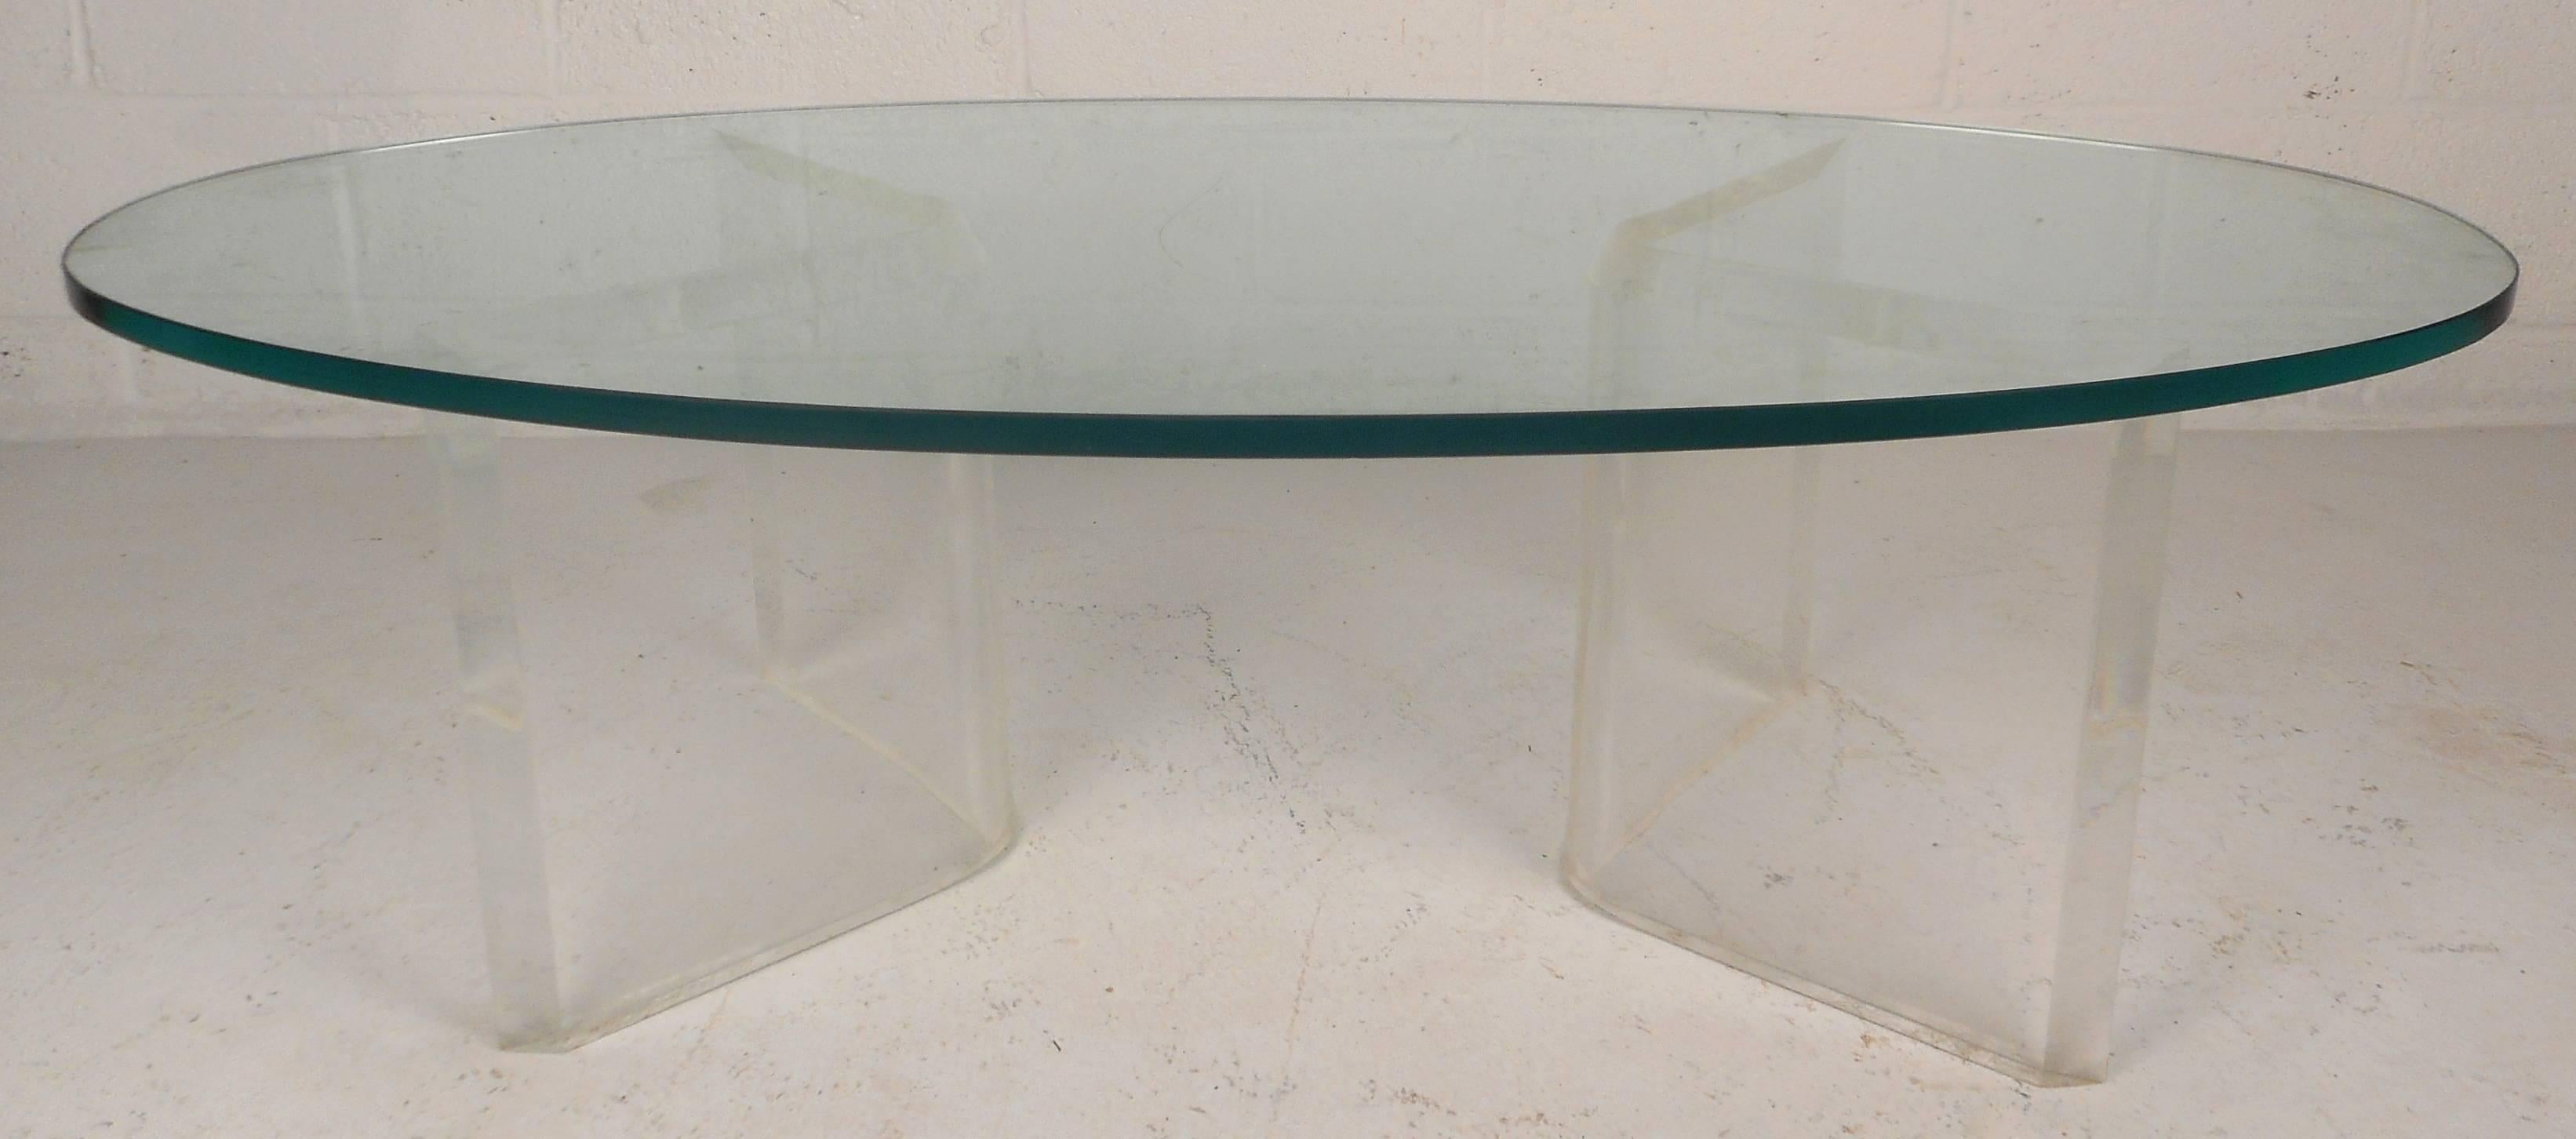 Beautiful vintage modern coffee table features a unique two-piece 